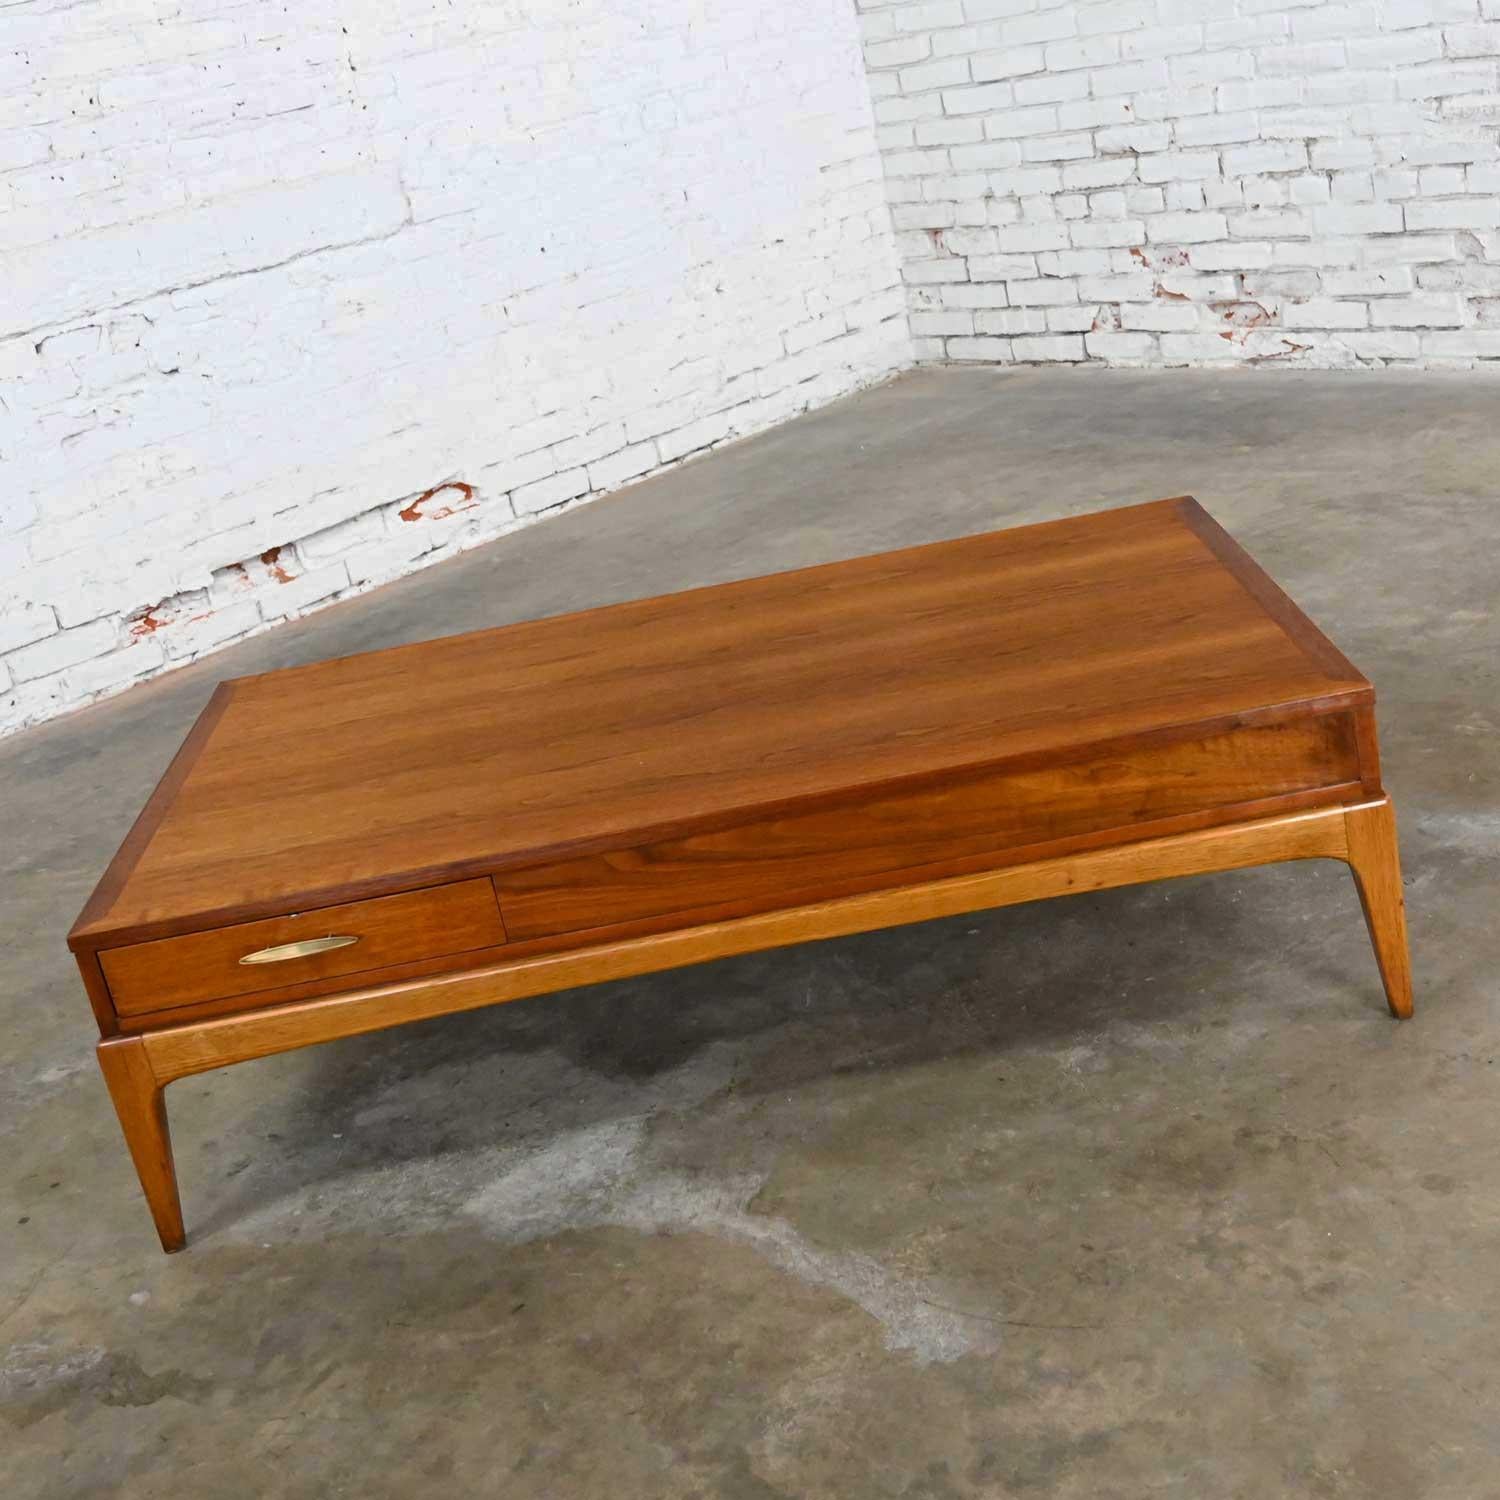 Iconic mid-century modern walnut coffee table with brass plated metal hardware by Lane Furniture for their Rhythm Collection. Beautiful condition, it has been completely restored. But keep in mind that this is vintage and not new so will have signs